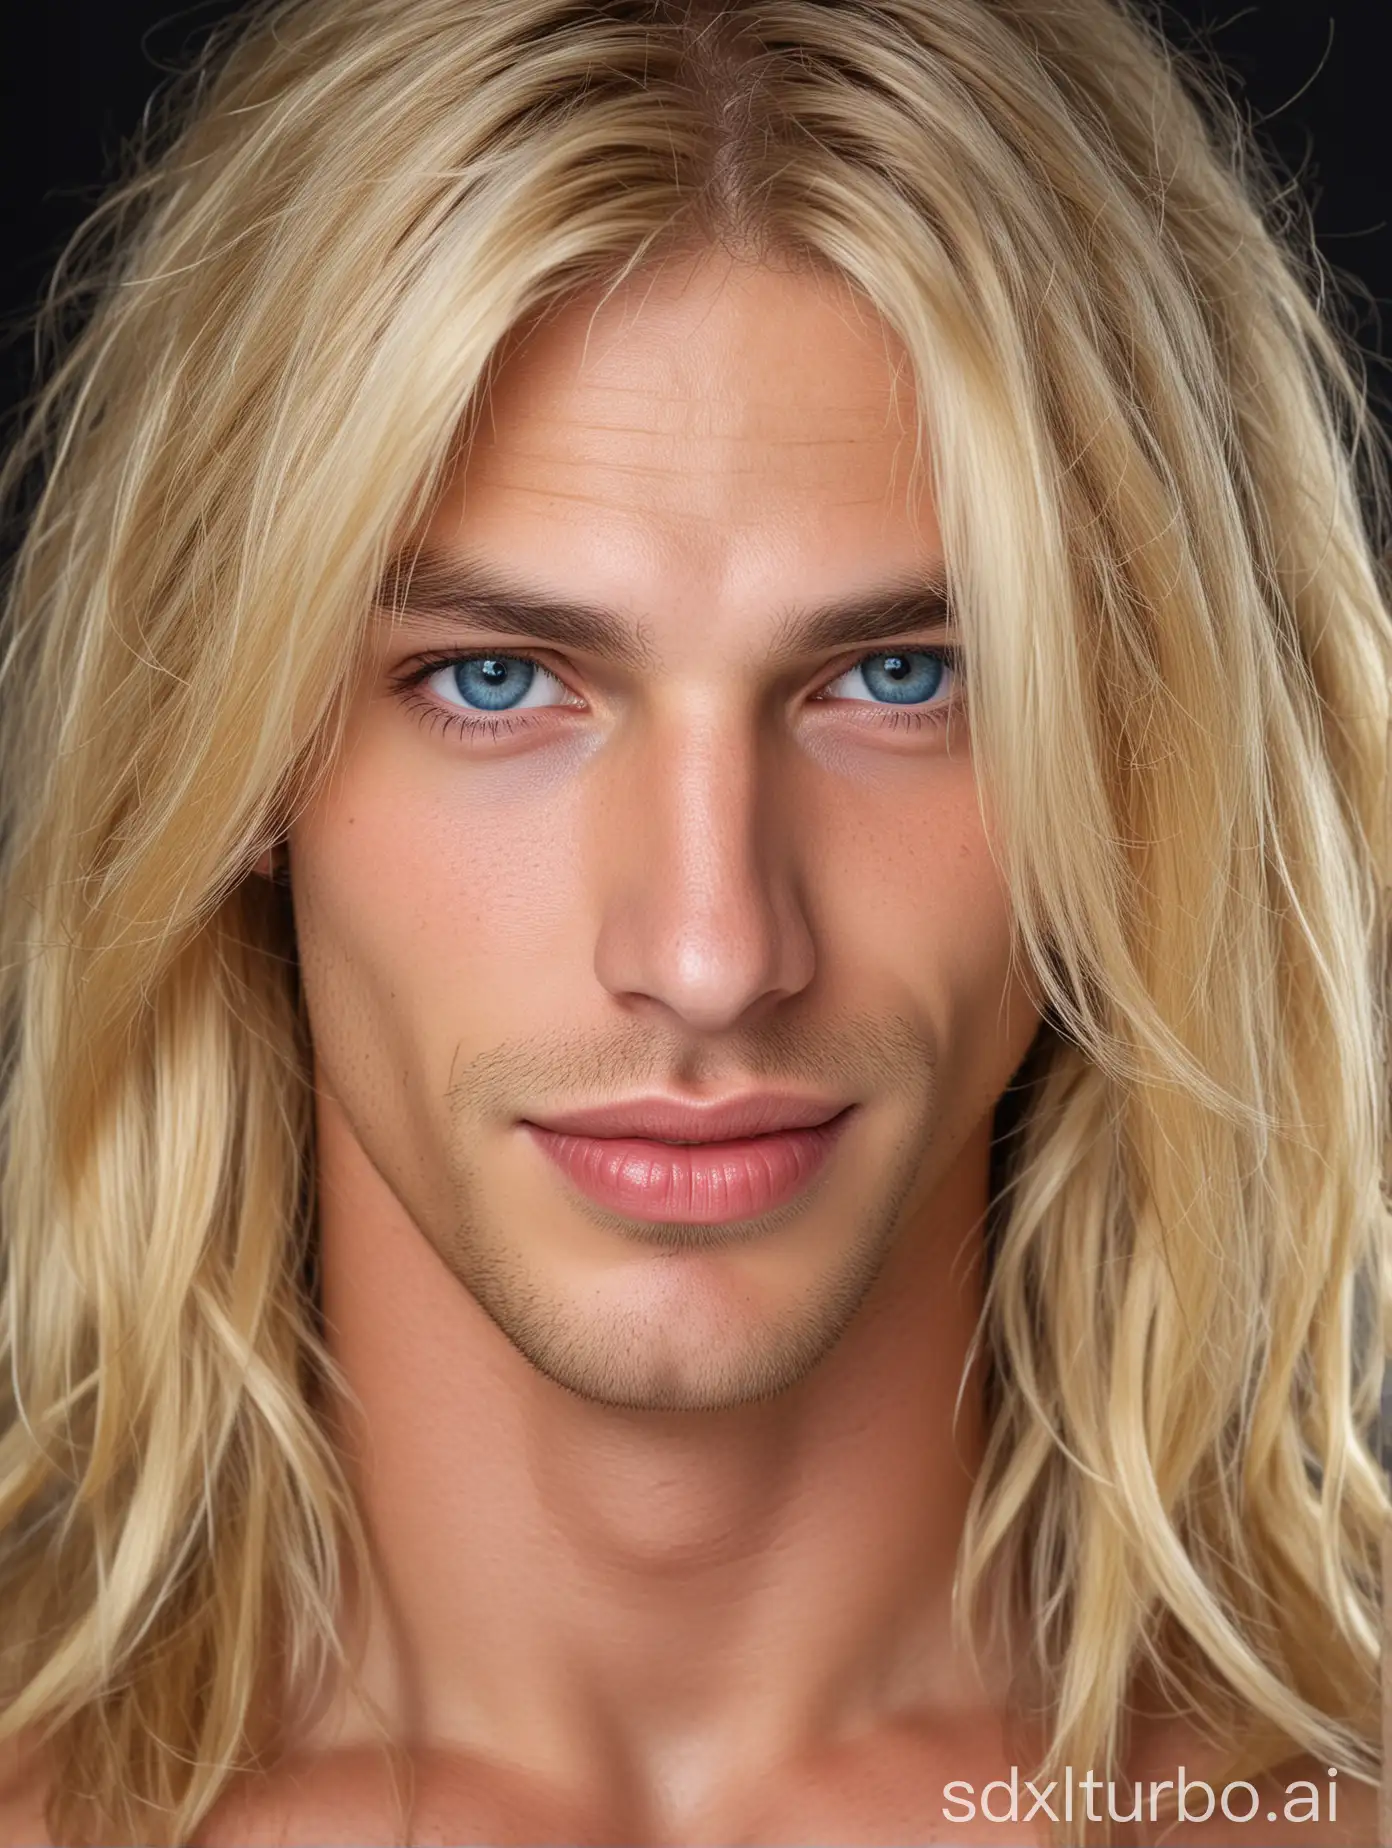 Blonde-Adonis-with-Long-Hair-and-Joyful-Expression-in-Blue-Eyes